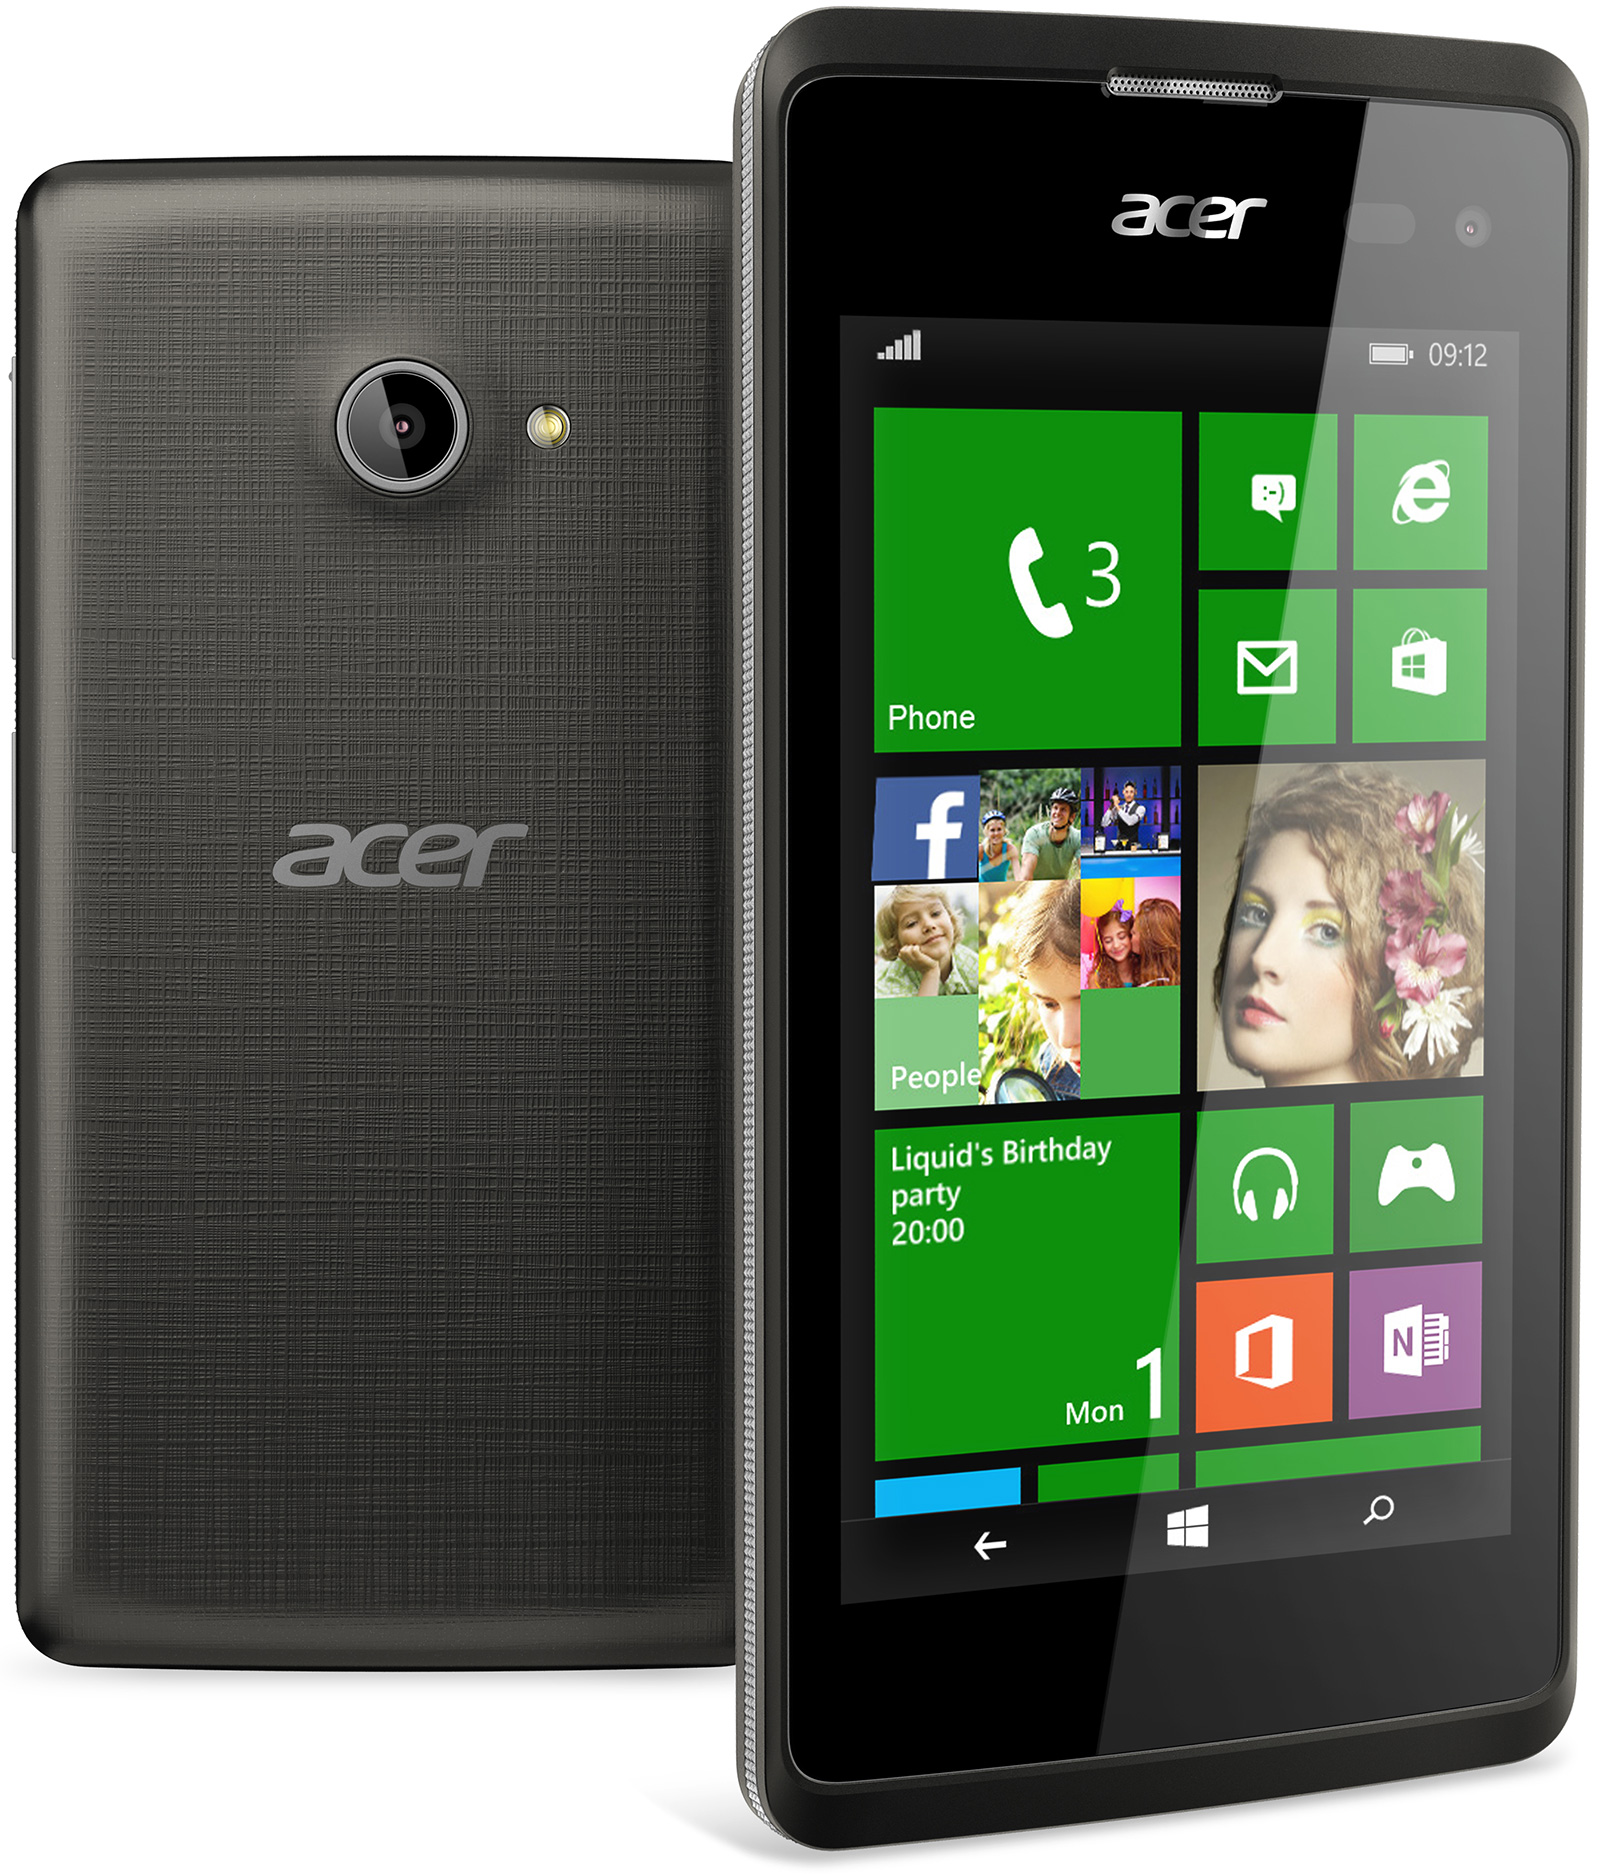 MWC: Acers erstes Windows-Smartphone